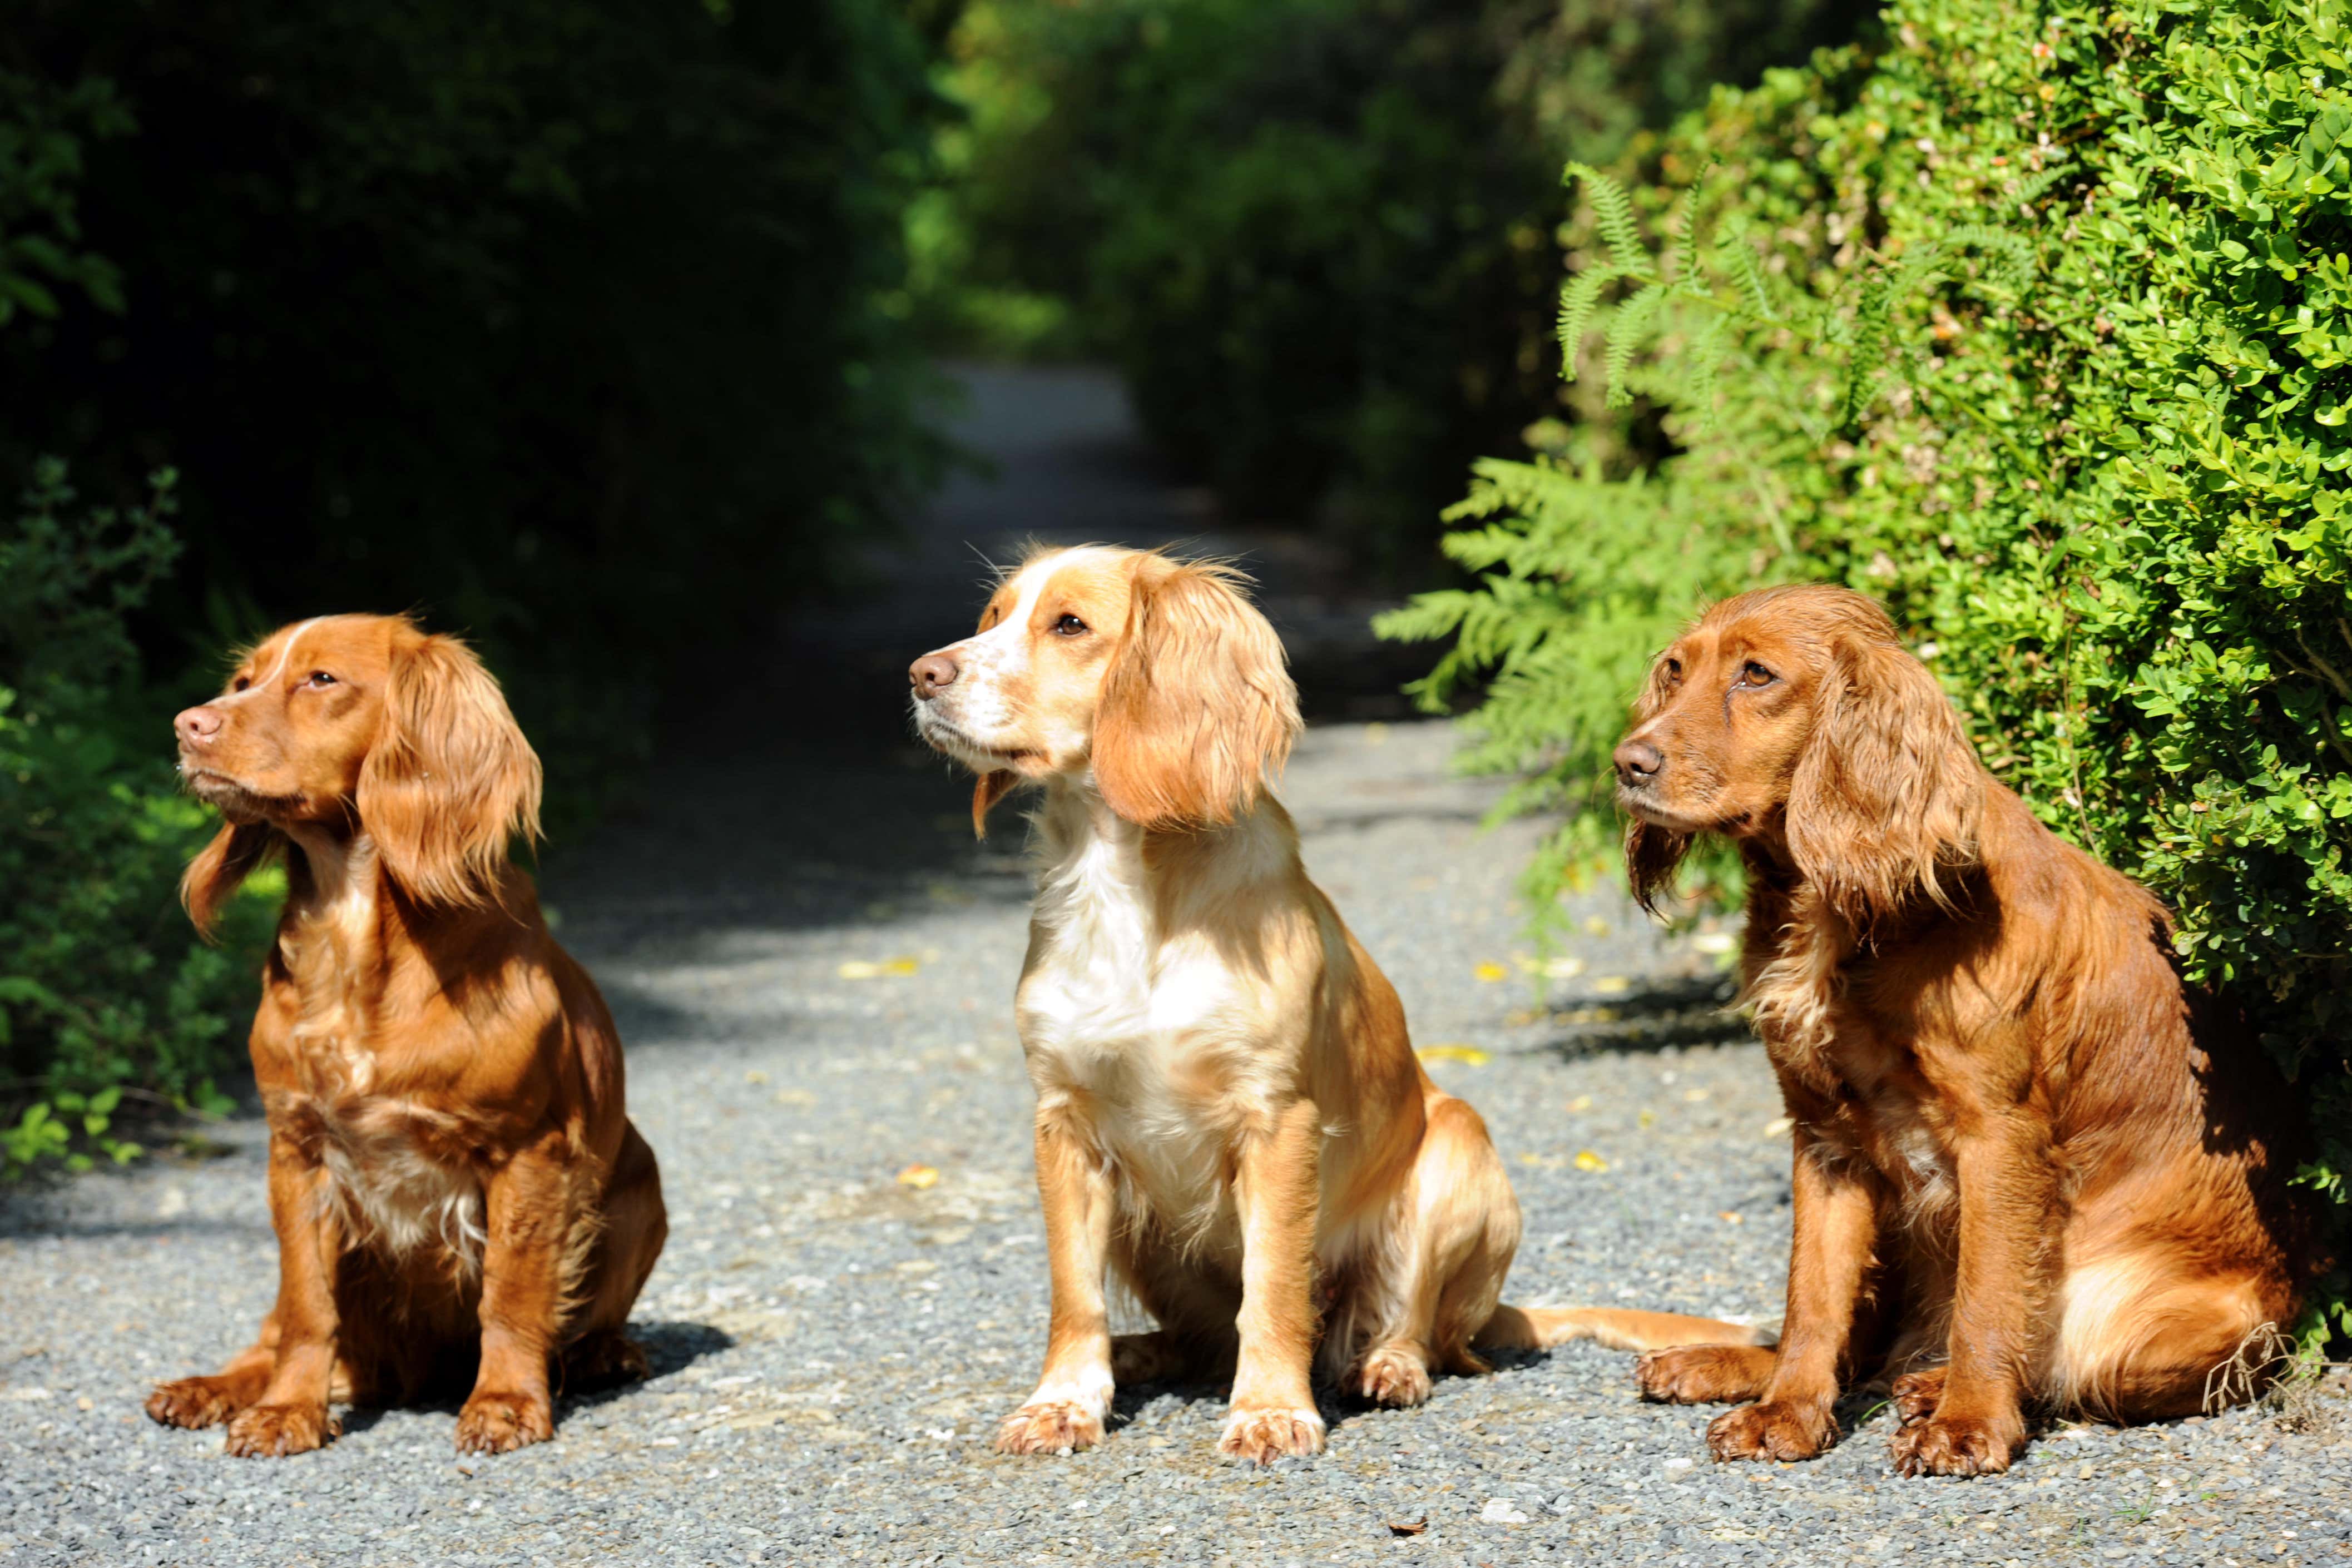 A cocker spaniel was poisoned after eating a chocolate bar last year